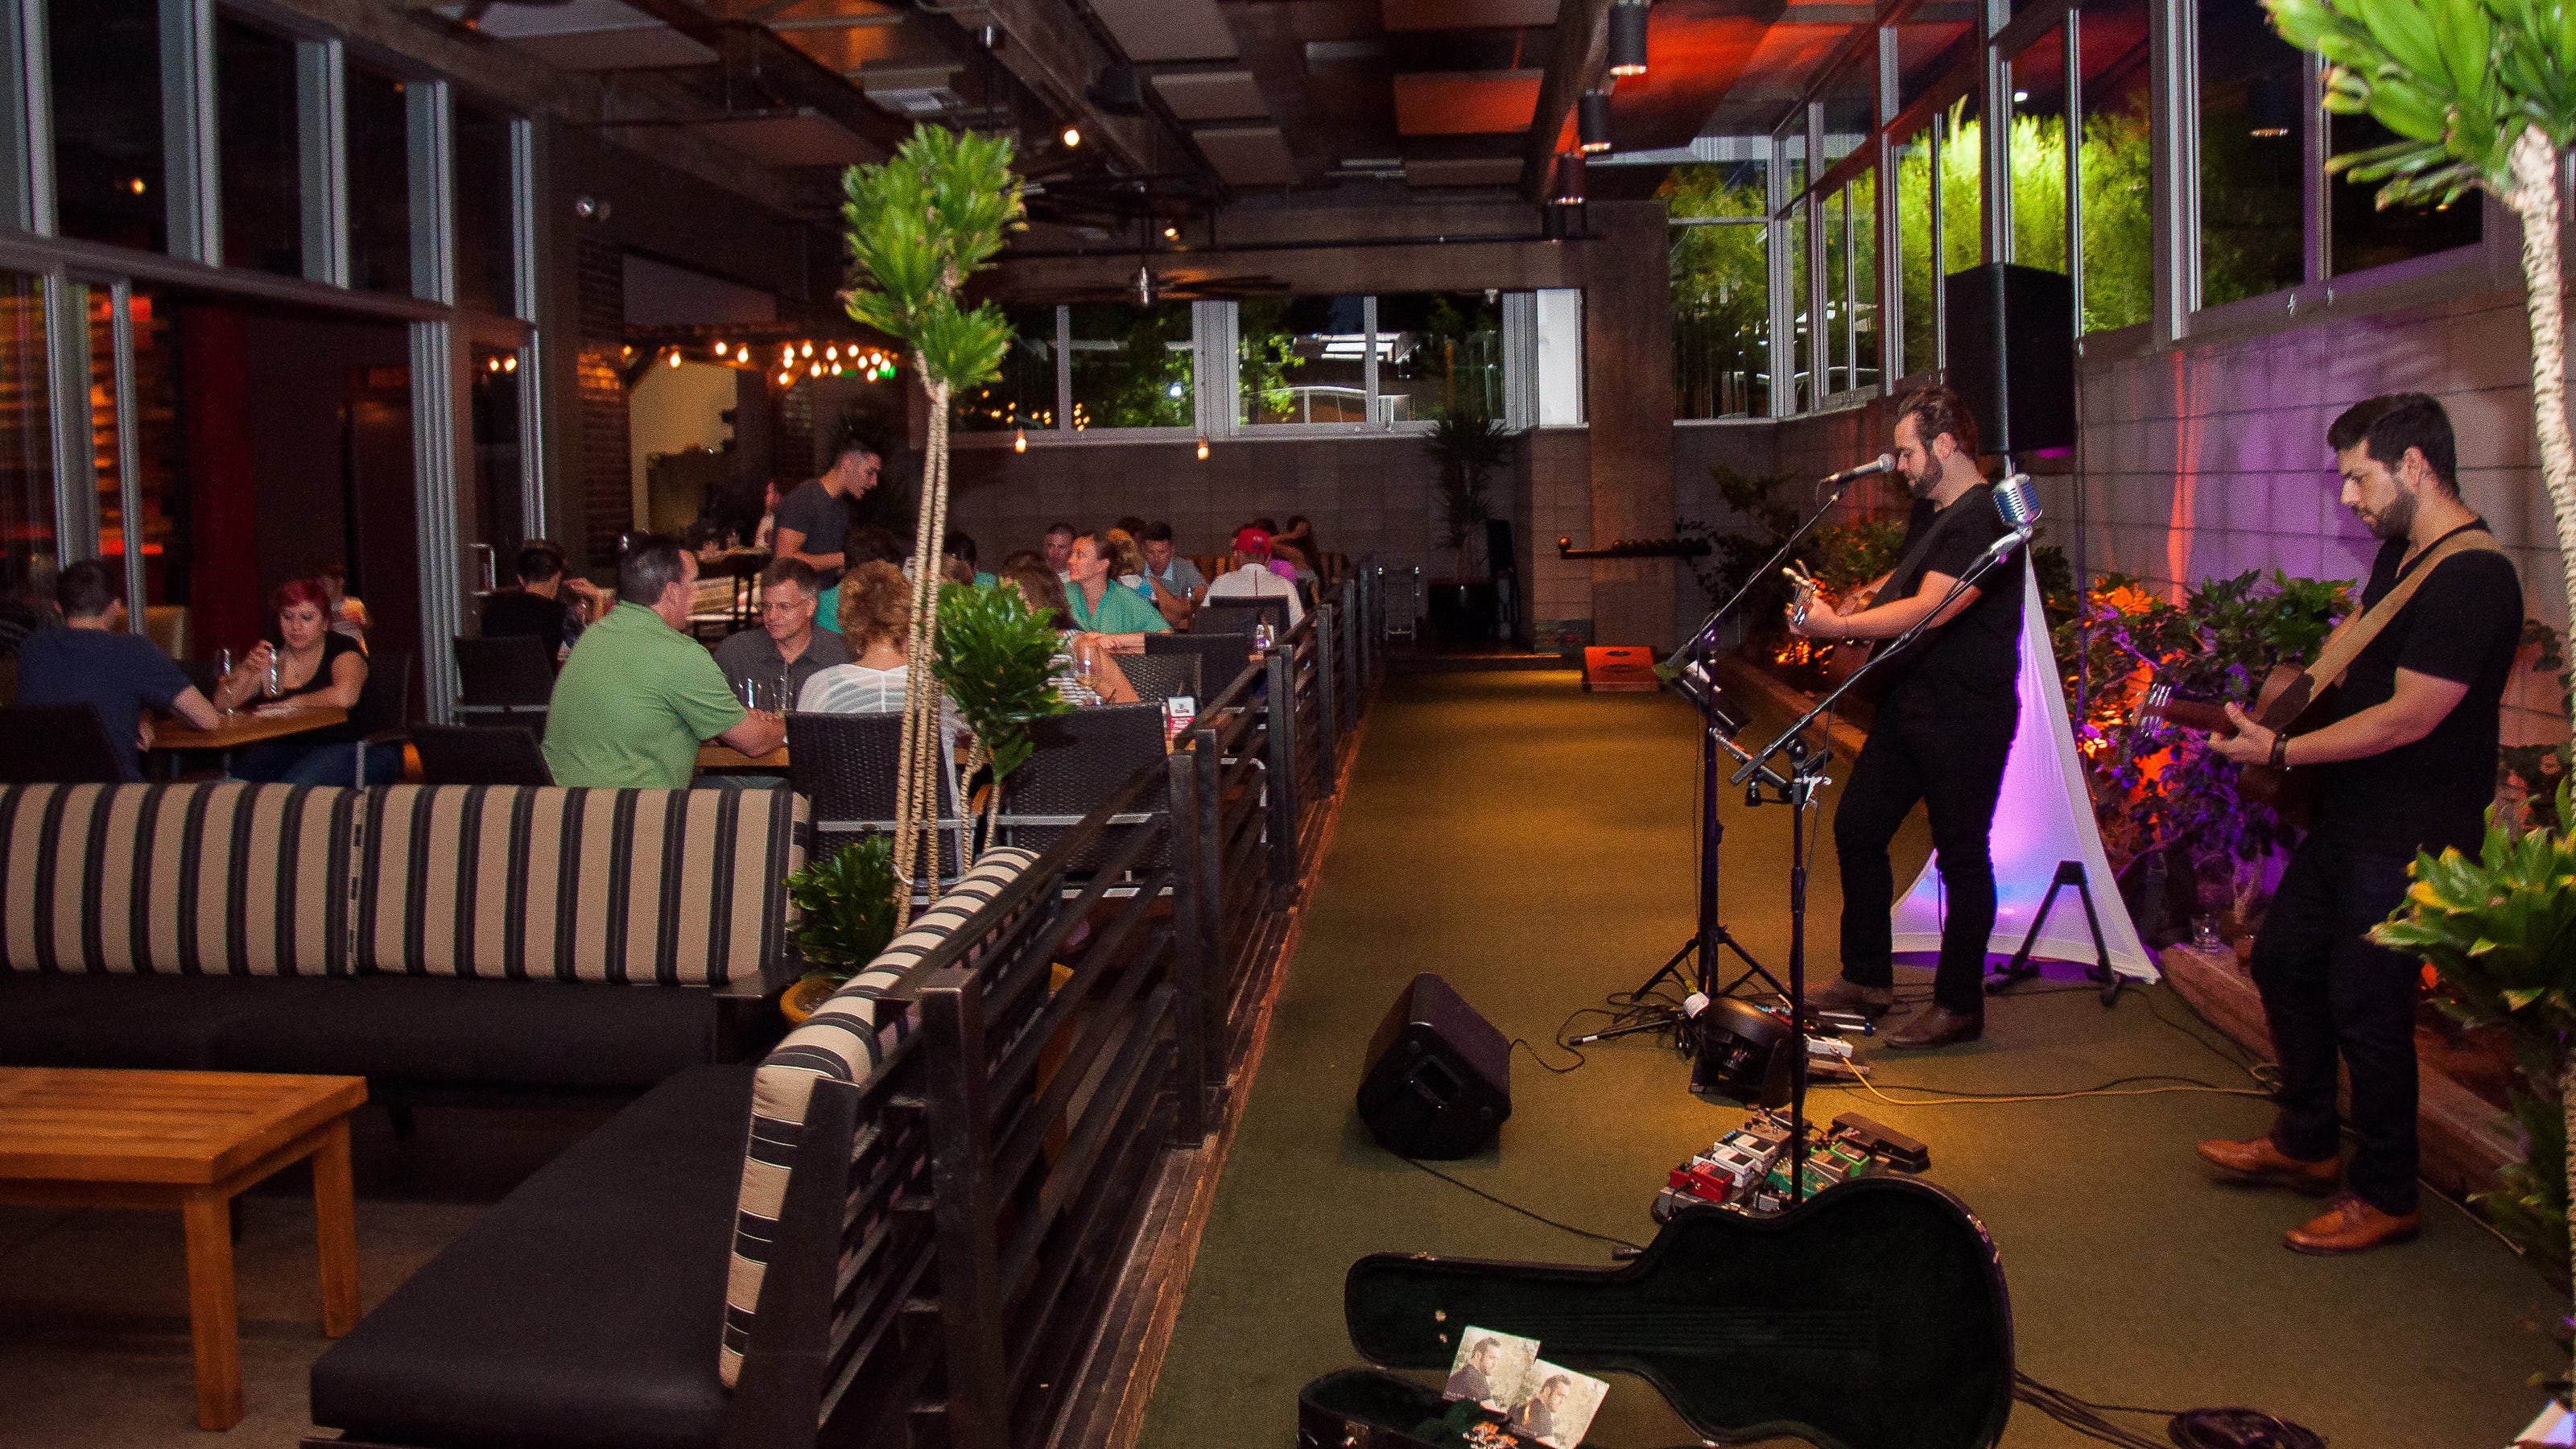 Dinner and live music in metro Phoenix 15 restaurants to try